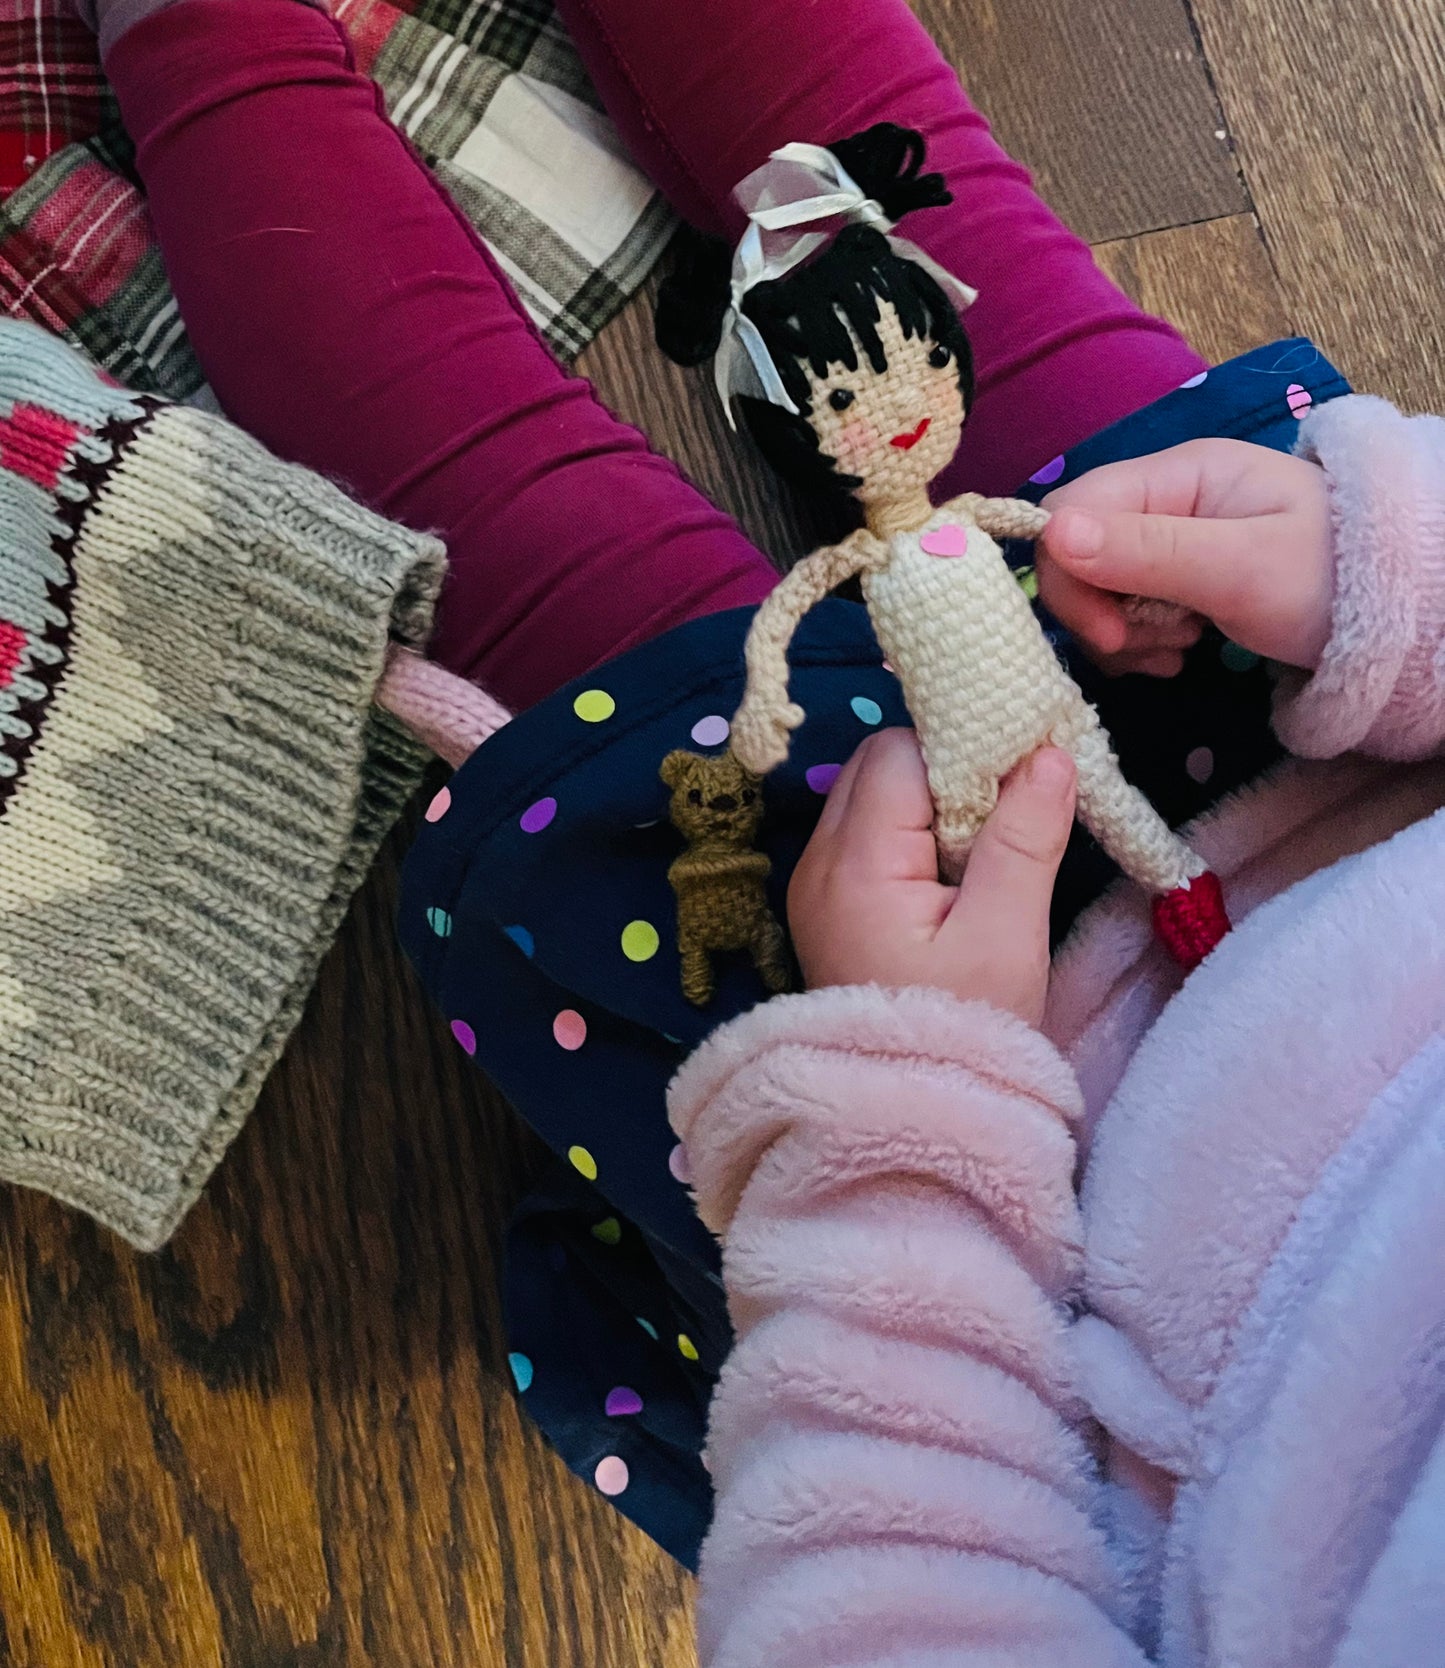 Lily doll being held by a child